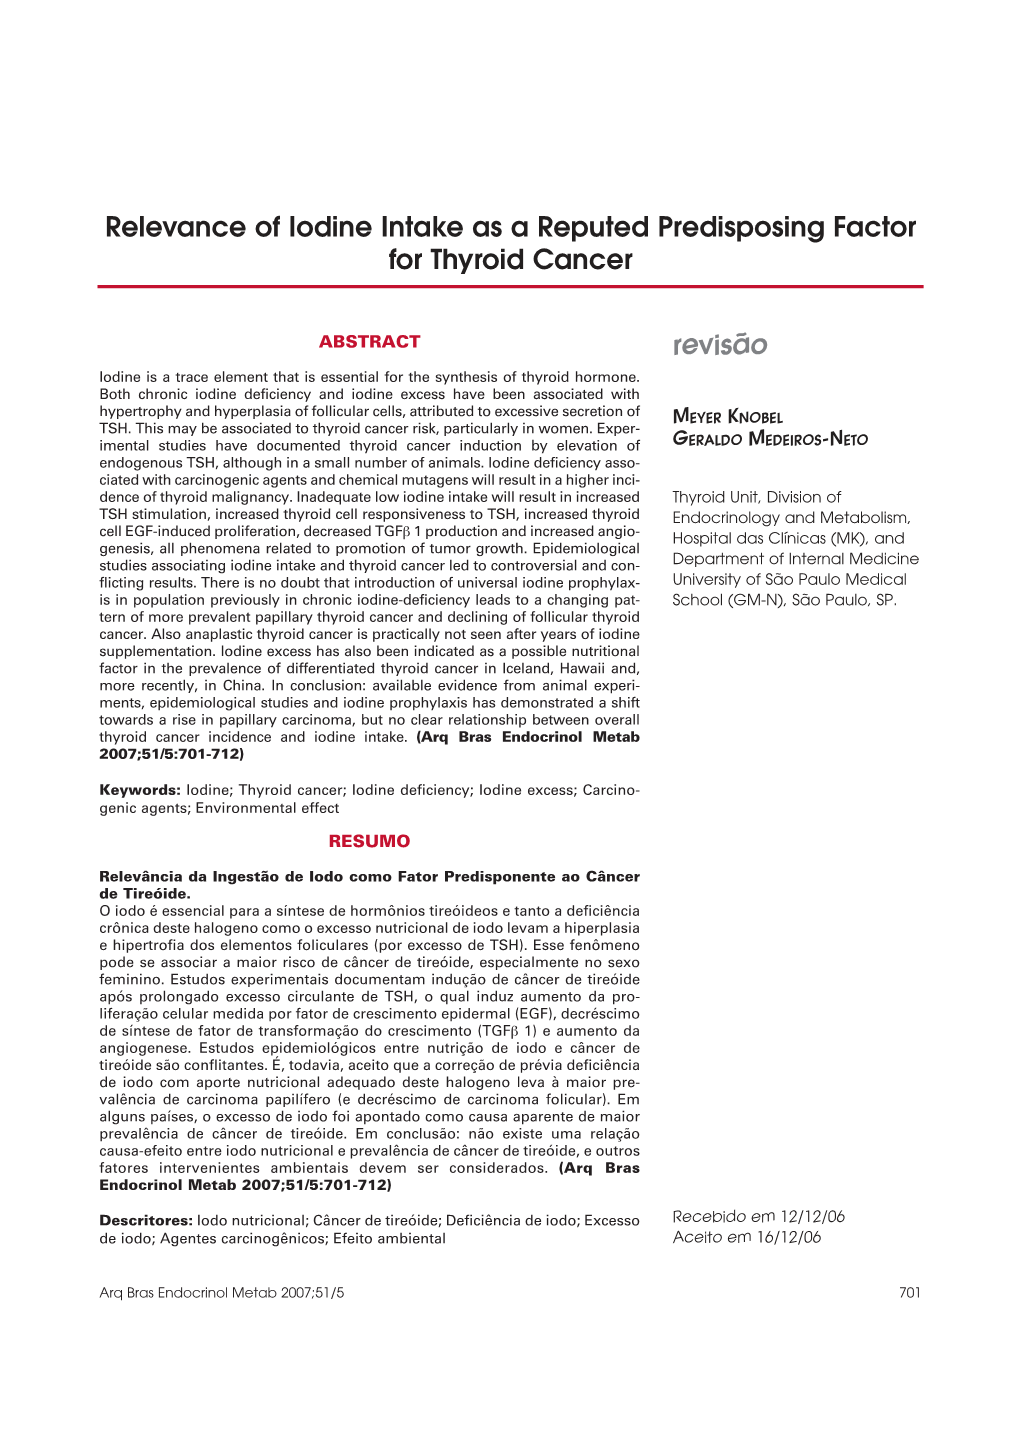 Revisão Relevance of Iodine Intake As a Reputed Predisposing Factor For